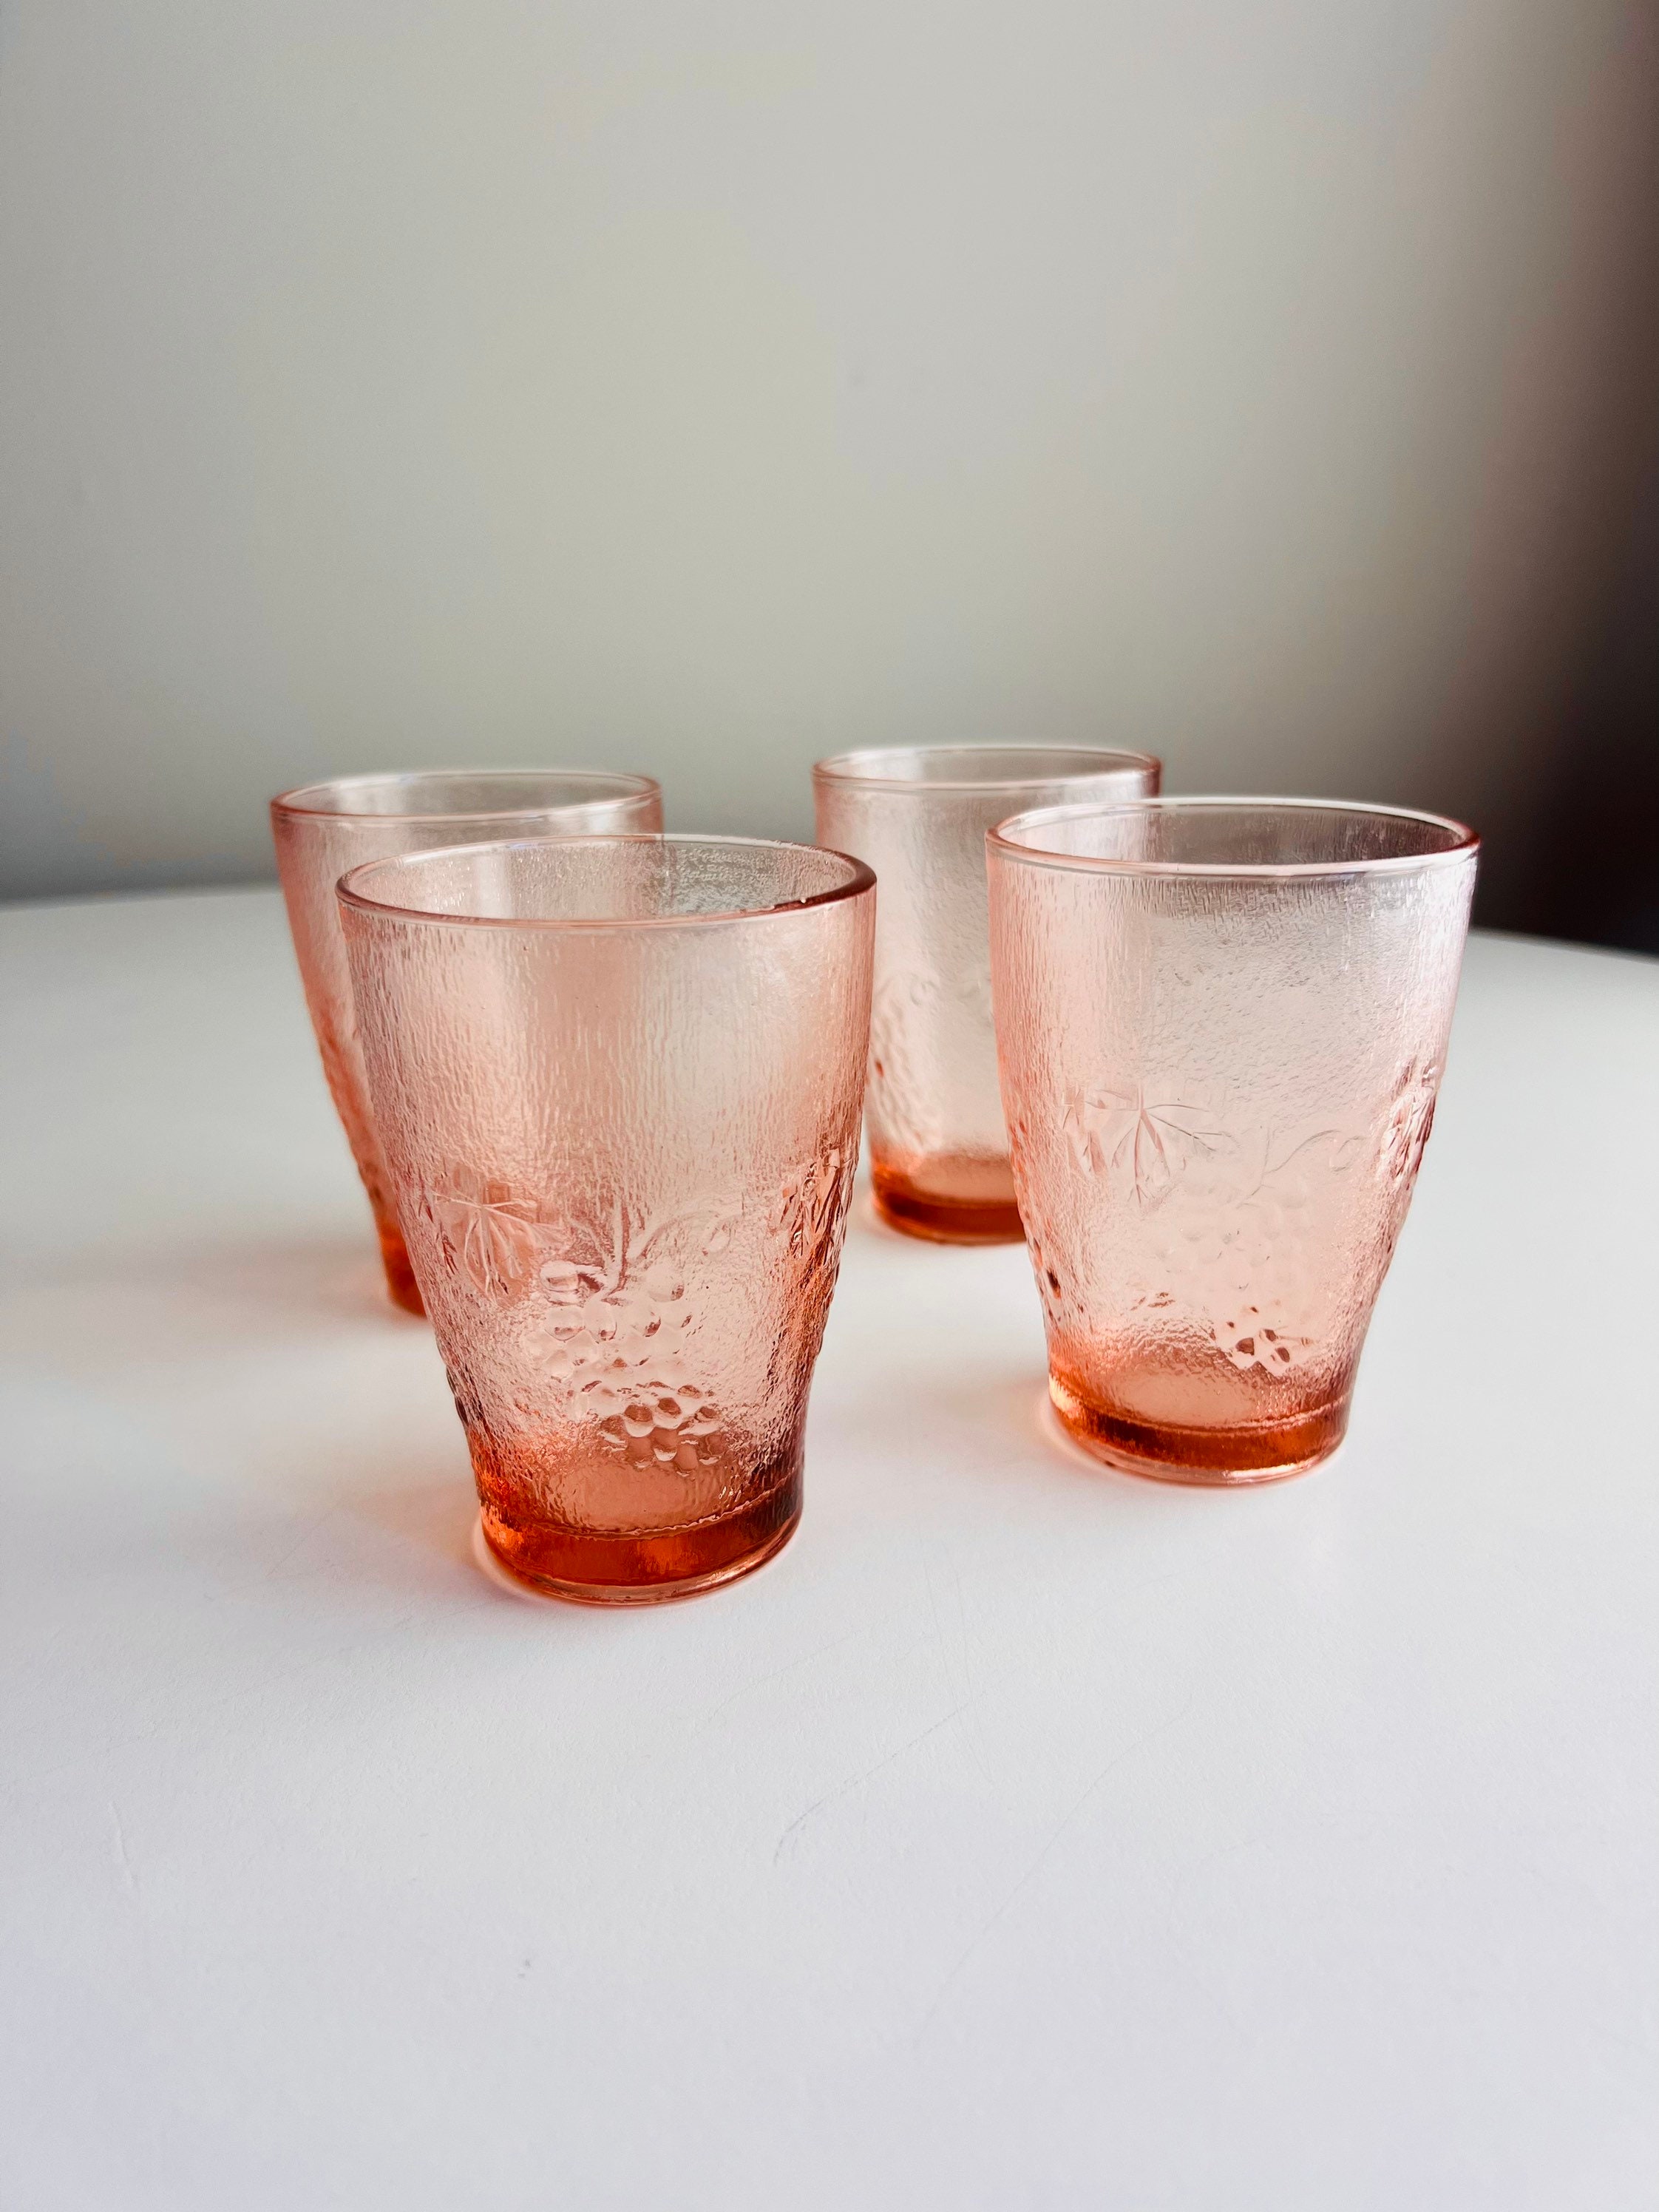 2 Pcs Drinking Glasses Set - 9.5 oz Modern Kitchen Drinking Glasses- Unique  Glassware for Weddings, Cocktails, Glass Cup Coffee Mug